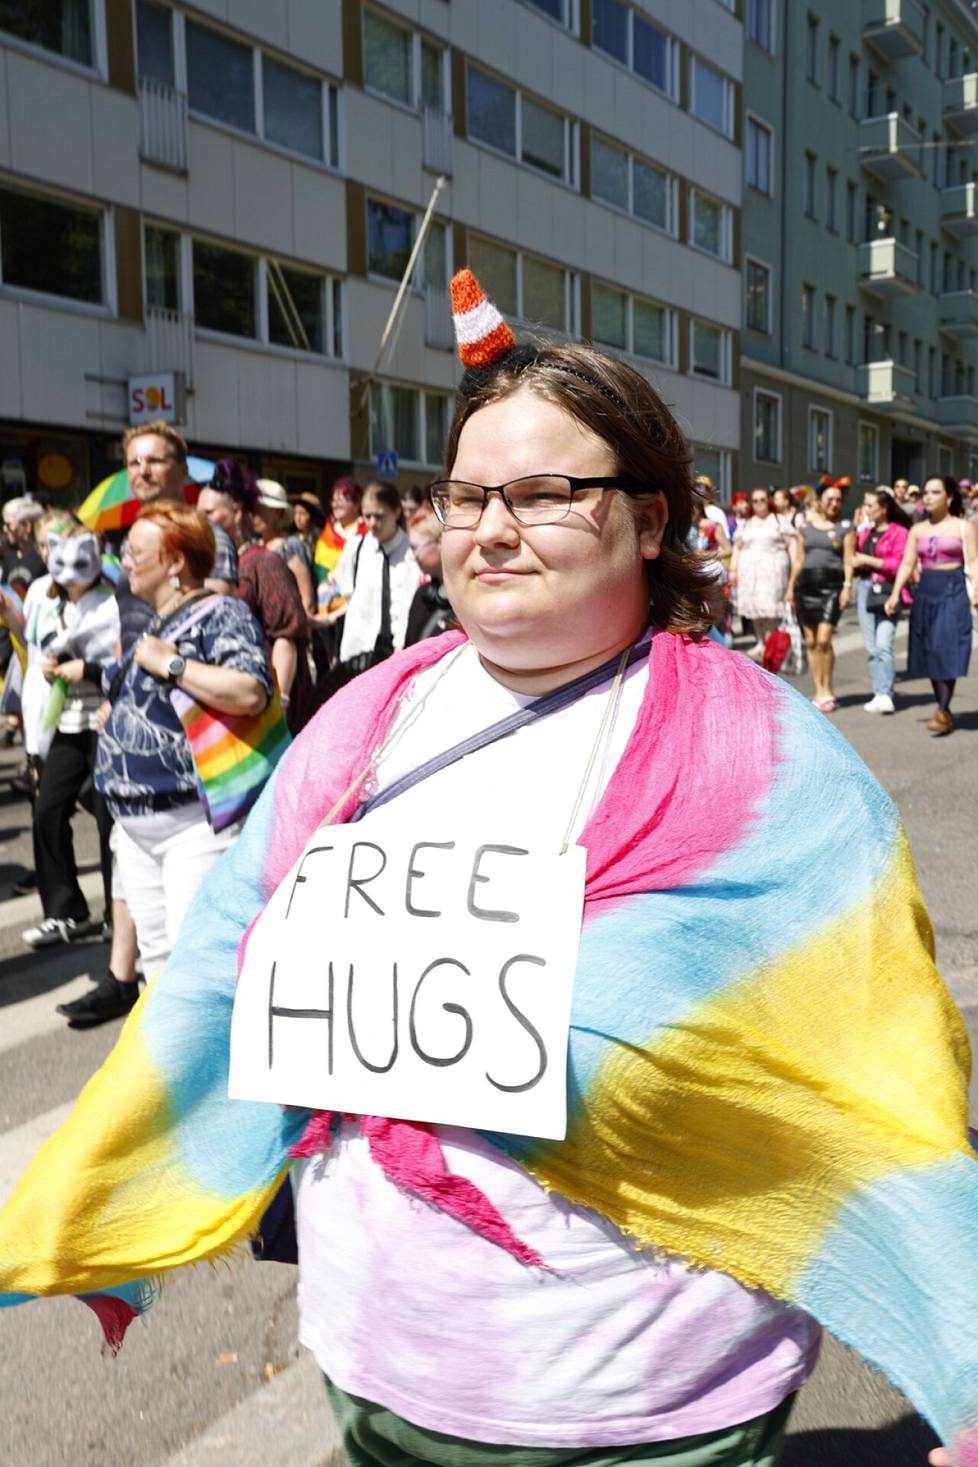 A few participants in the procession could see signs giving out free hugs.  Viola Kuru said that she got her first hug already on the metro ride towards the procession.